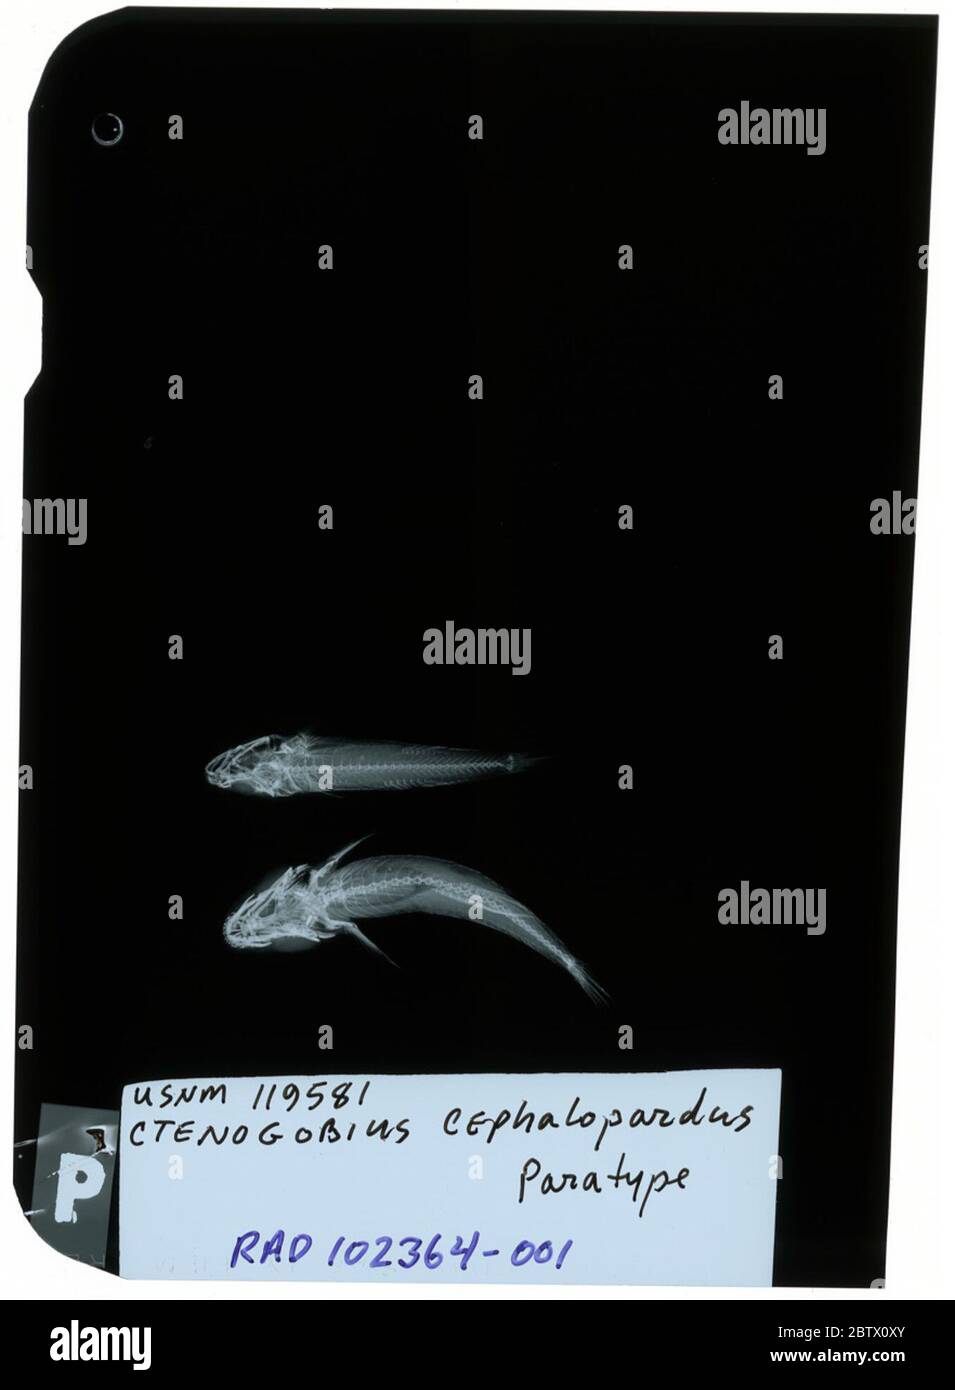 Ctenogobius cephalopardus. Radiograph is of a paratype; The Smithsonian NMNH Division of Fishes uses the convention of maintaining the original species name for type specimens designated at the time of description. The currently accepted name for this species is Rhinogobius mekongianus.24 Oct 20181 Stock Photo